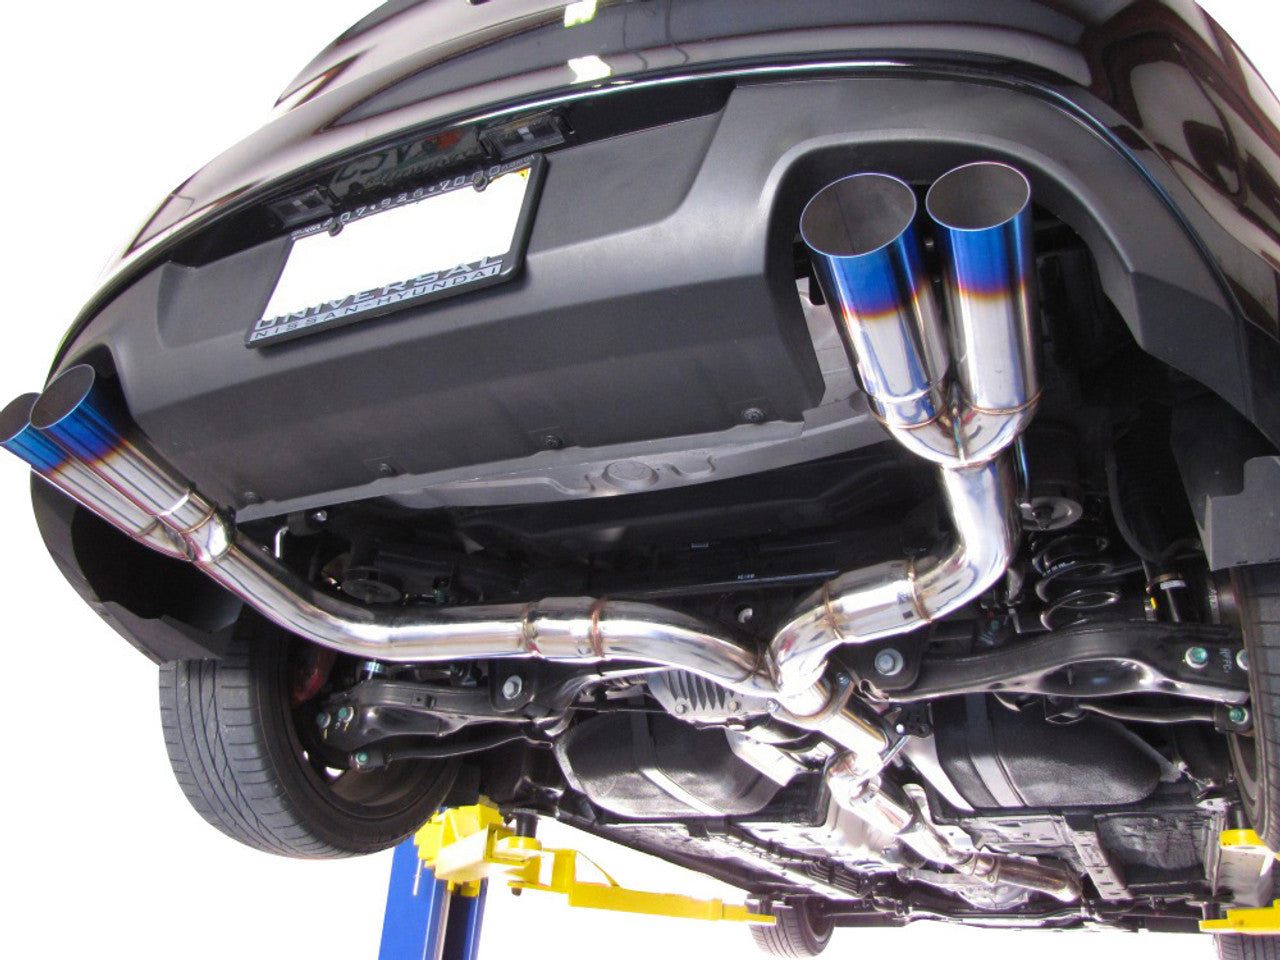 ISR Performance - Race Exhaust - Hyundai Genesis Coupe 3.8L V6 09+ (IS-RCE-GEN38)